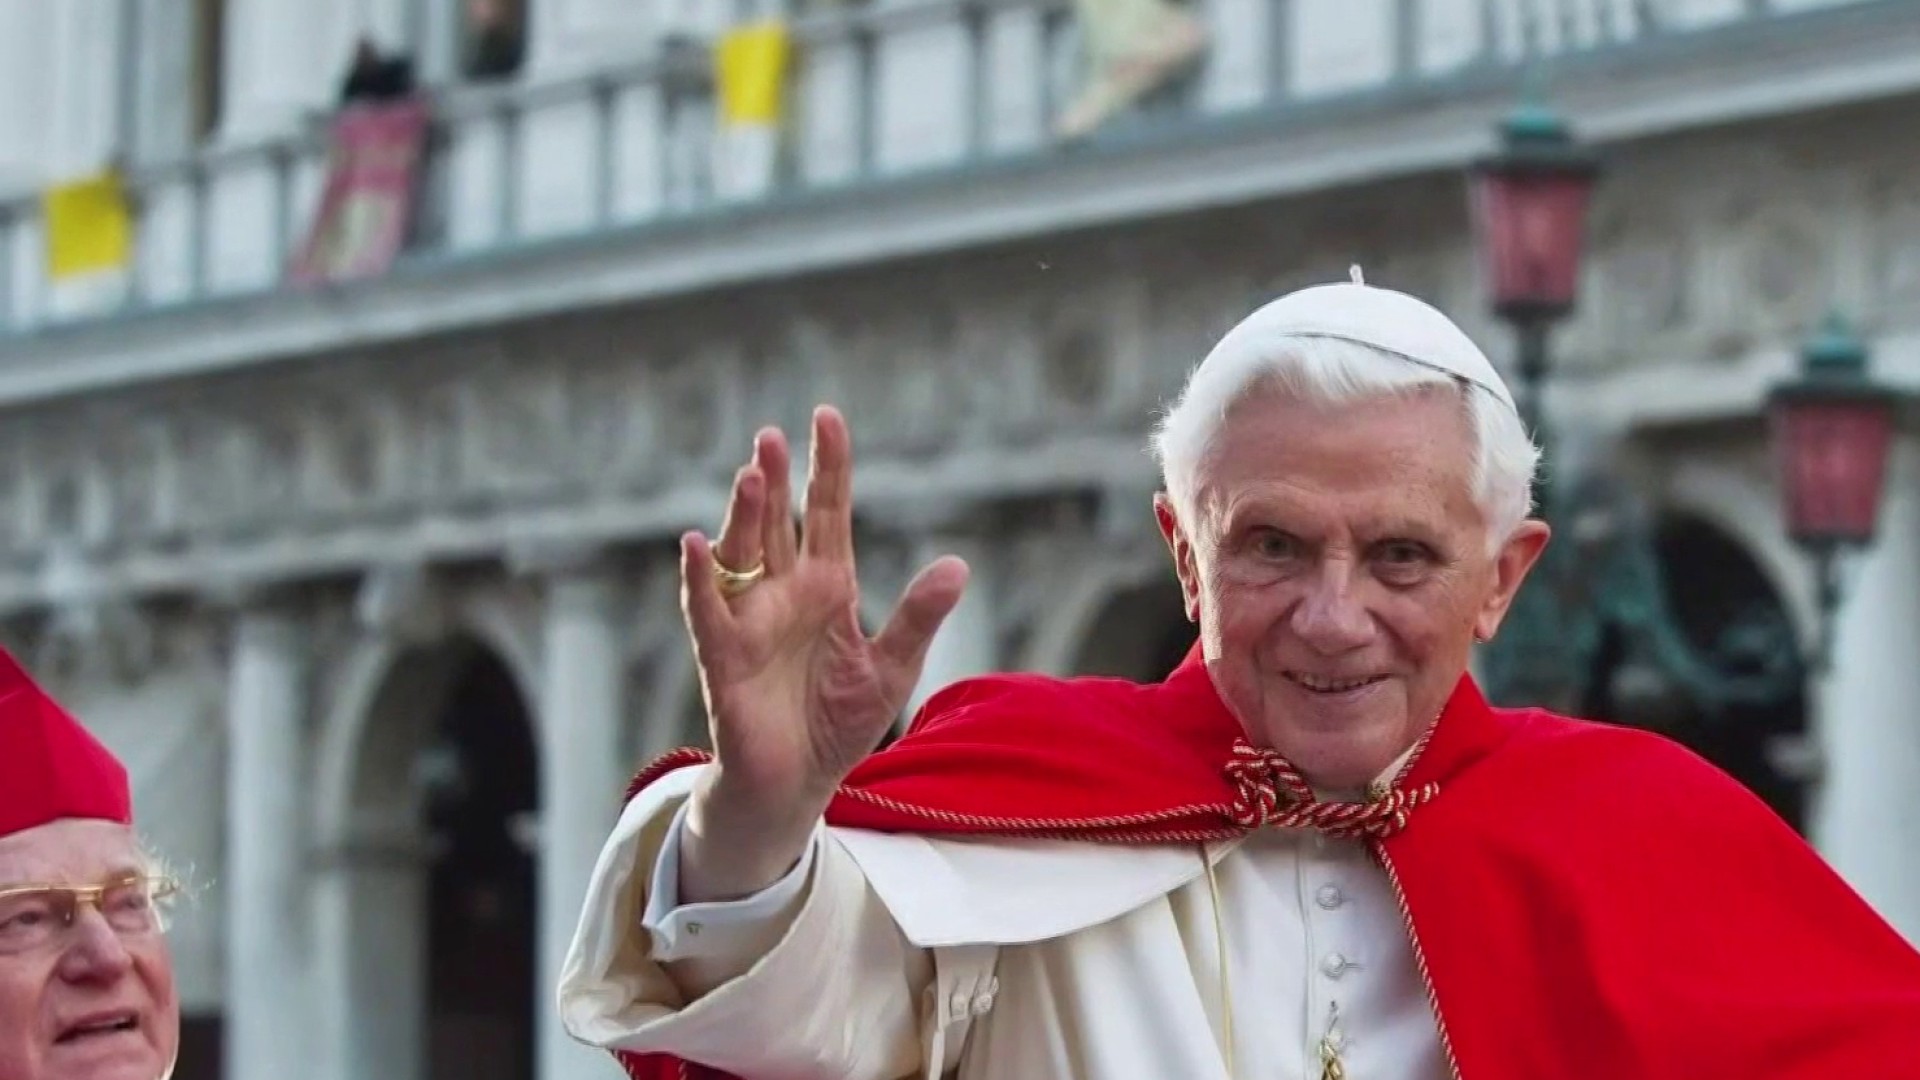 Pope Benedict XVI admits to being at 1980 meeting discussing abuse